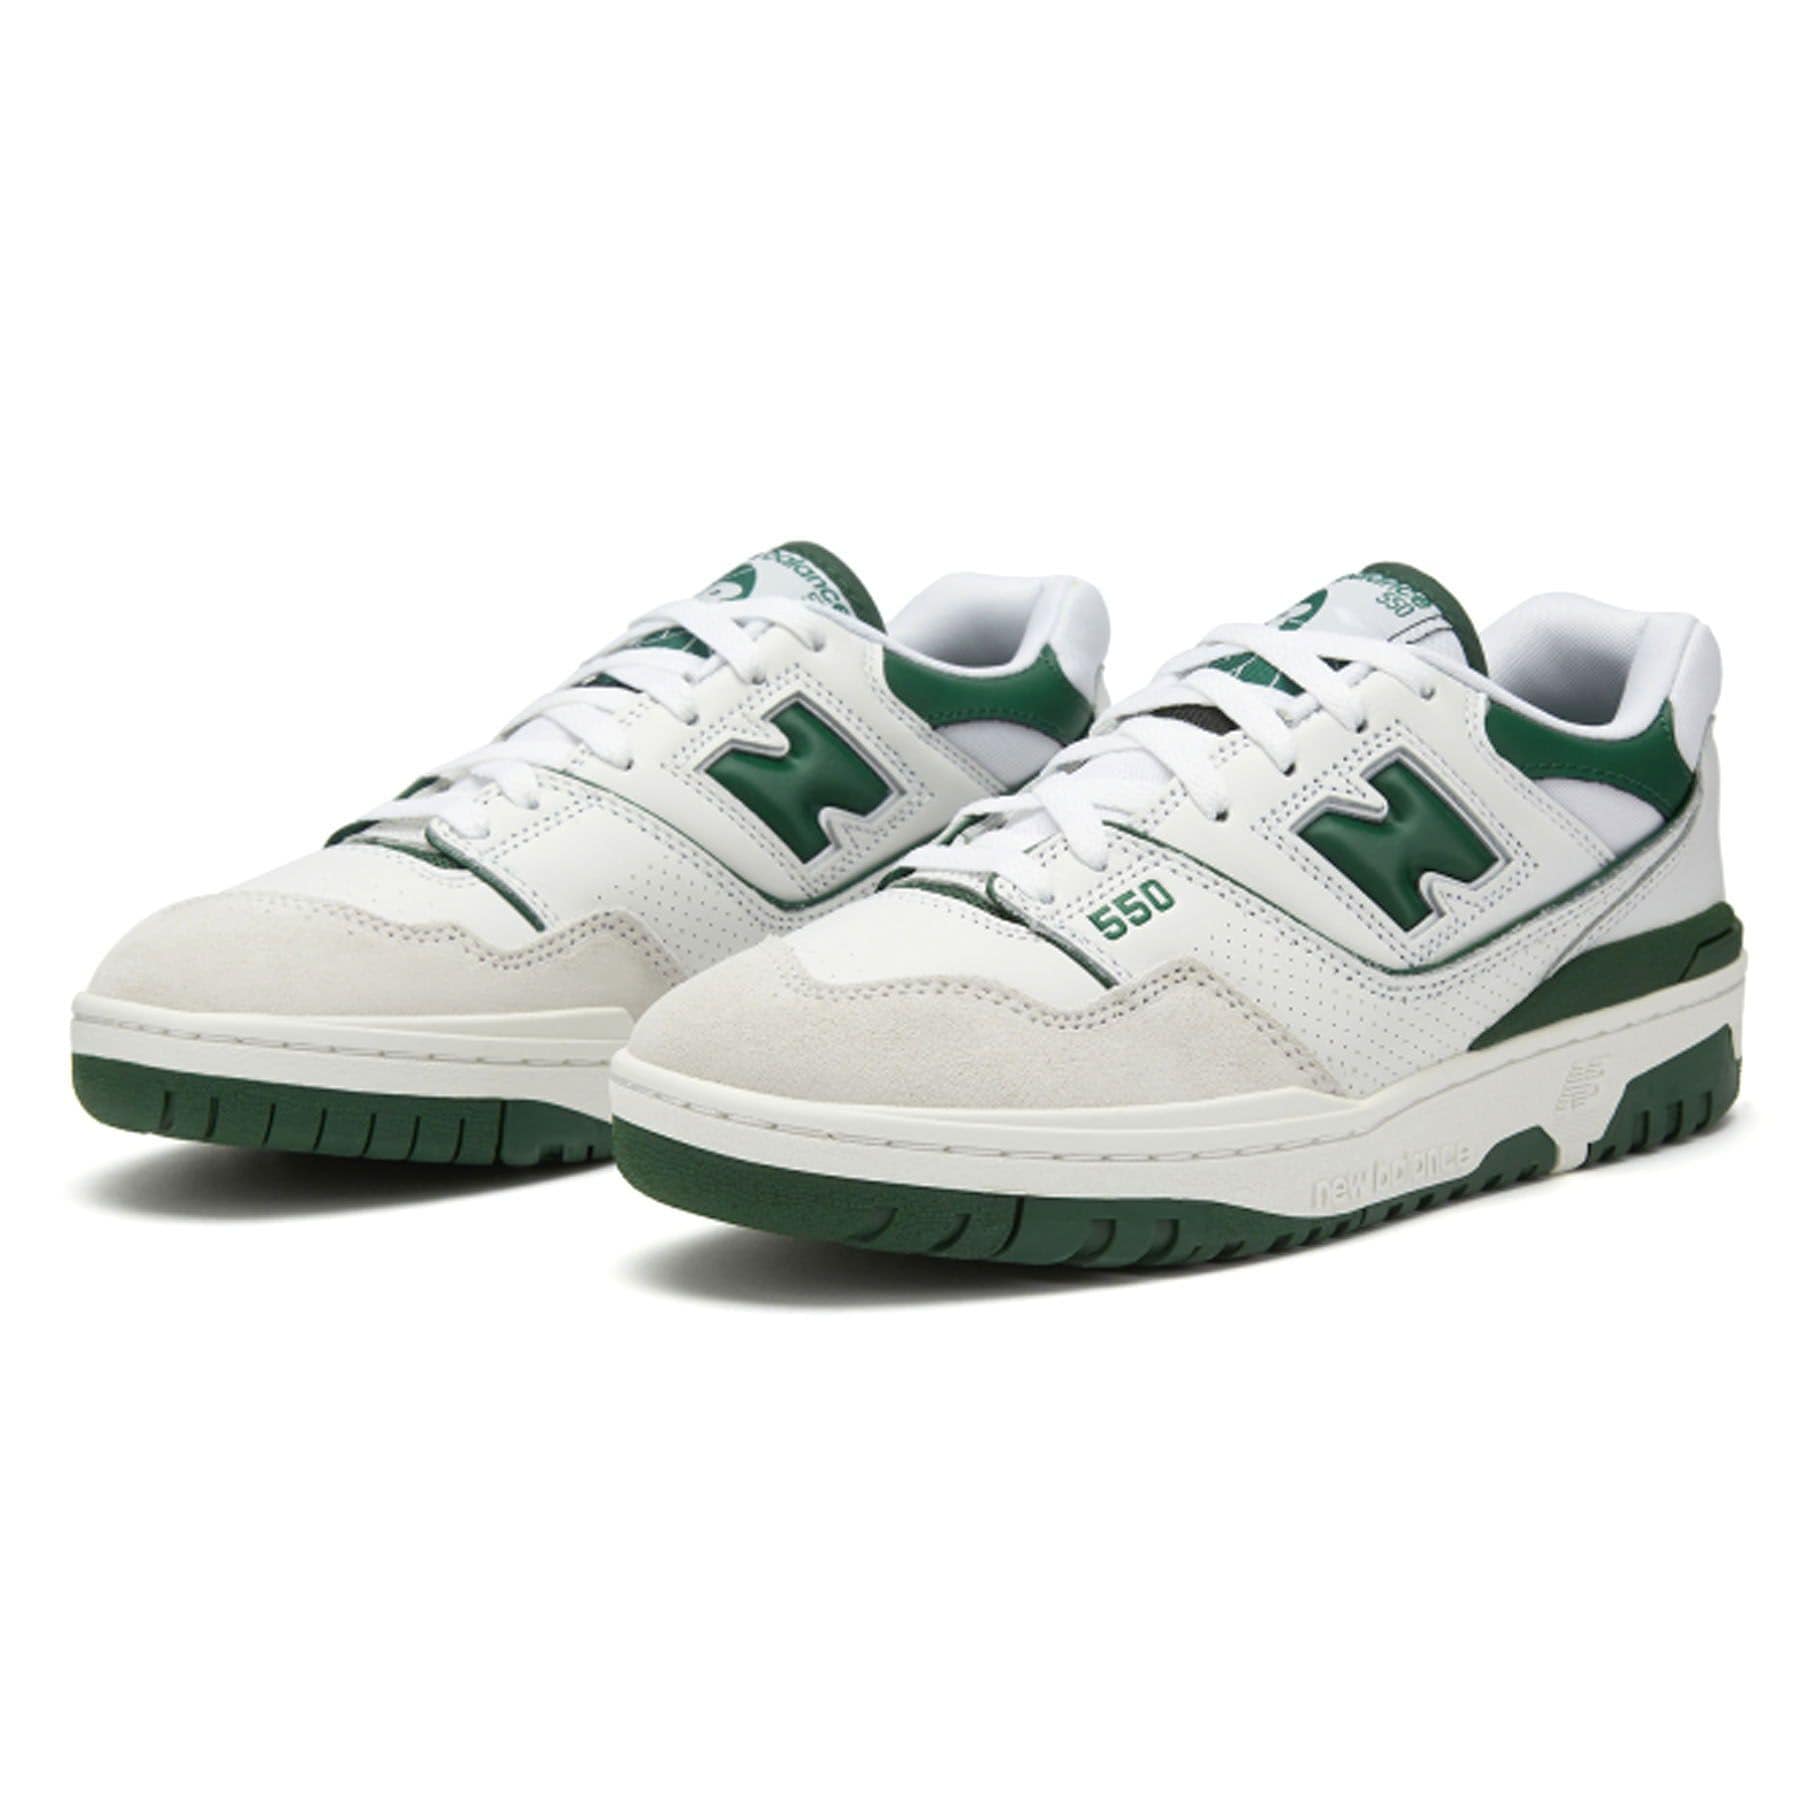 Double Boxed  179.99 New Balance 550 White Green Double Boxed